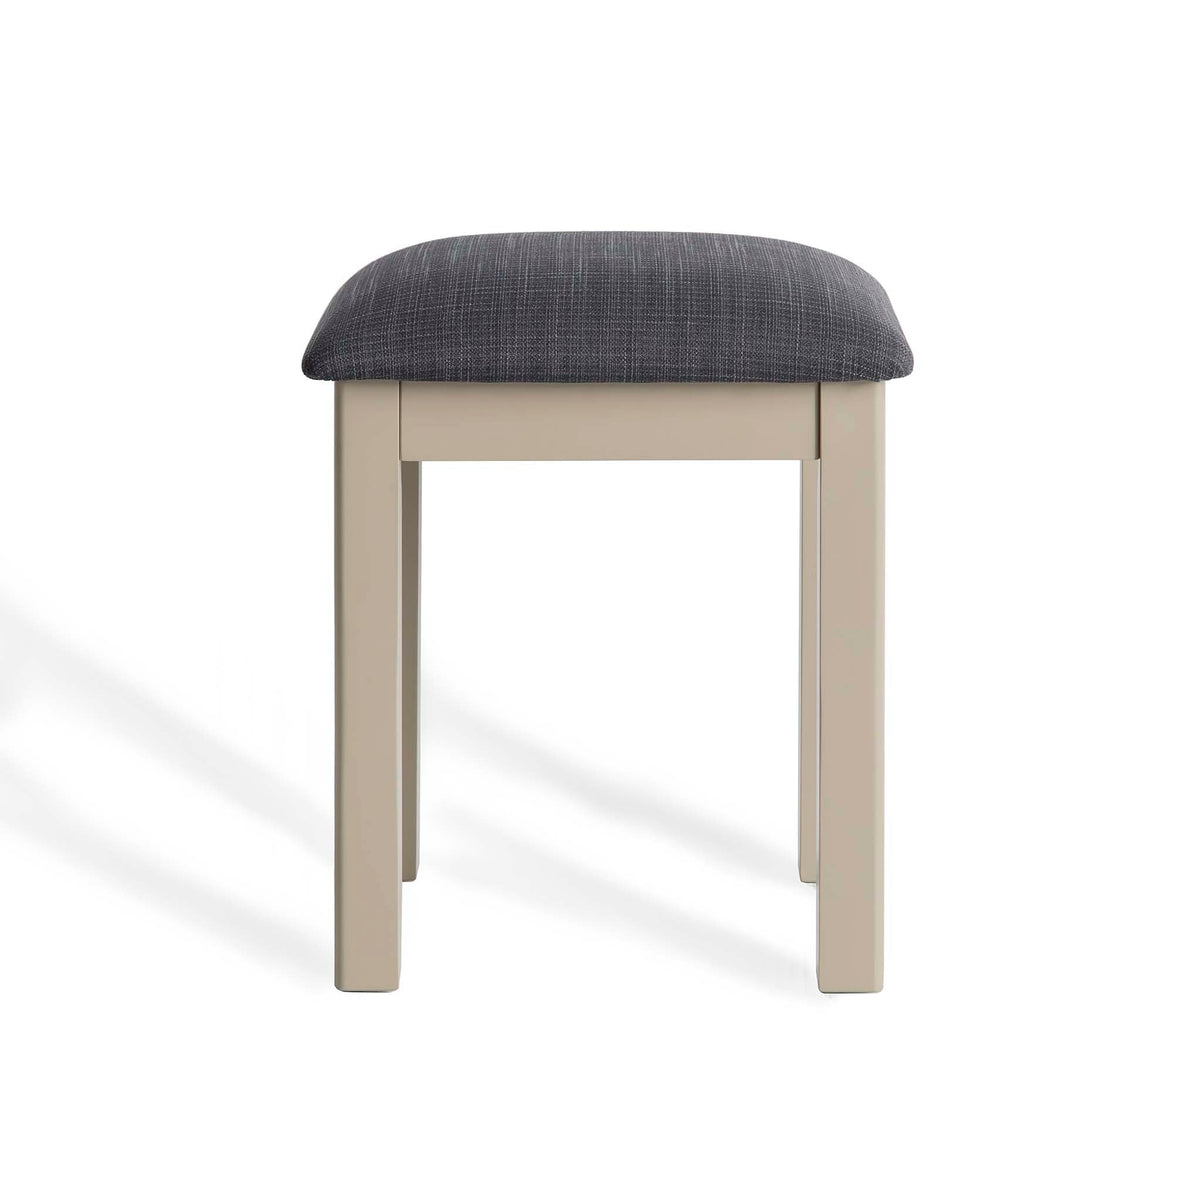 The Padstow Stone Grey Stool by Roseland Furniture